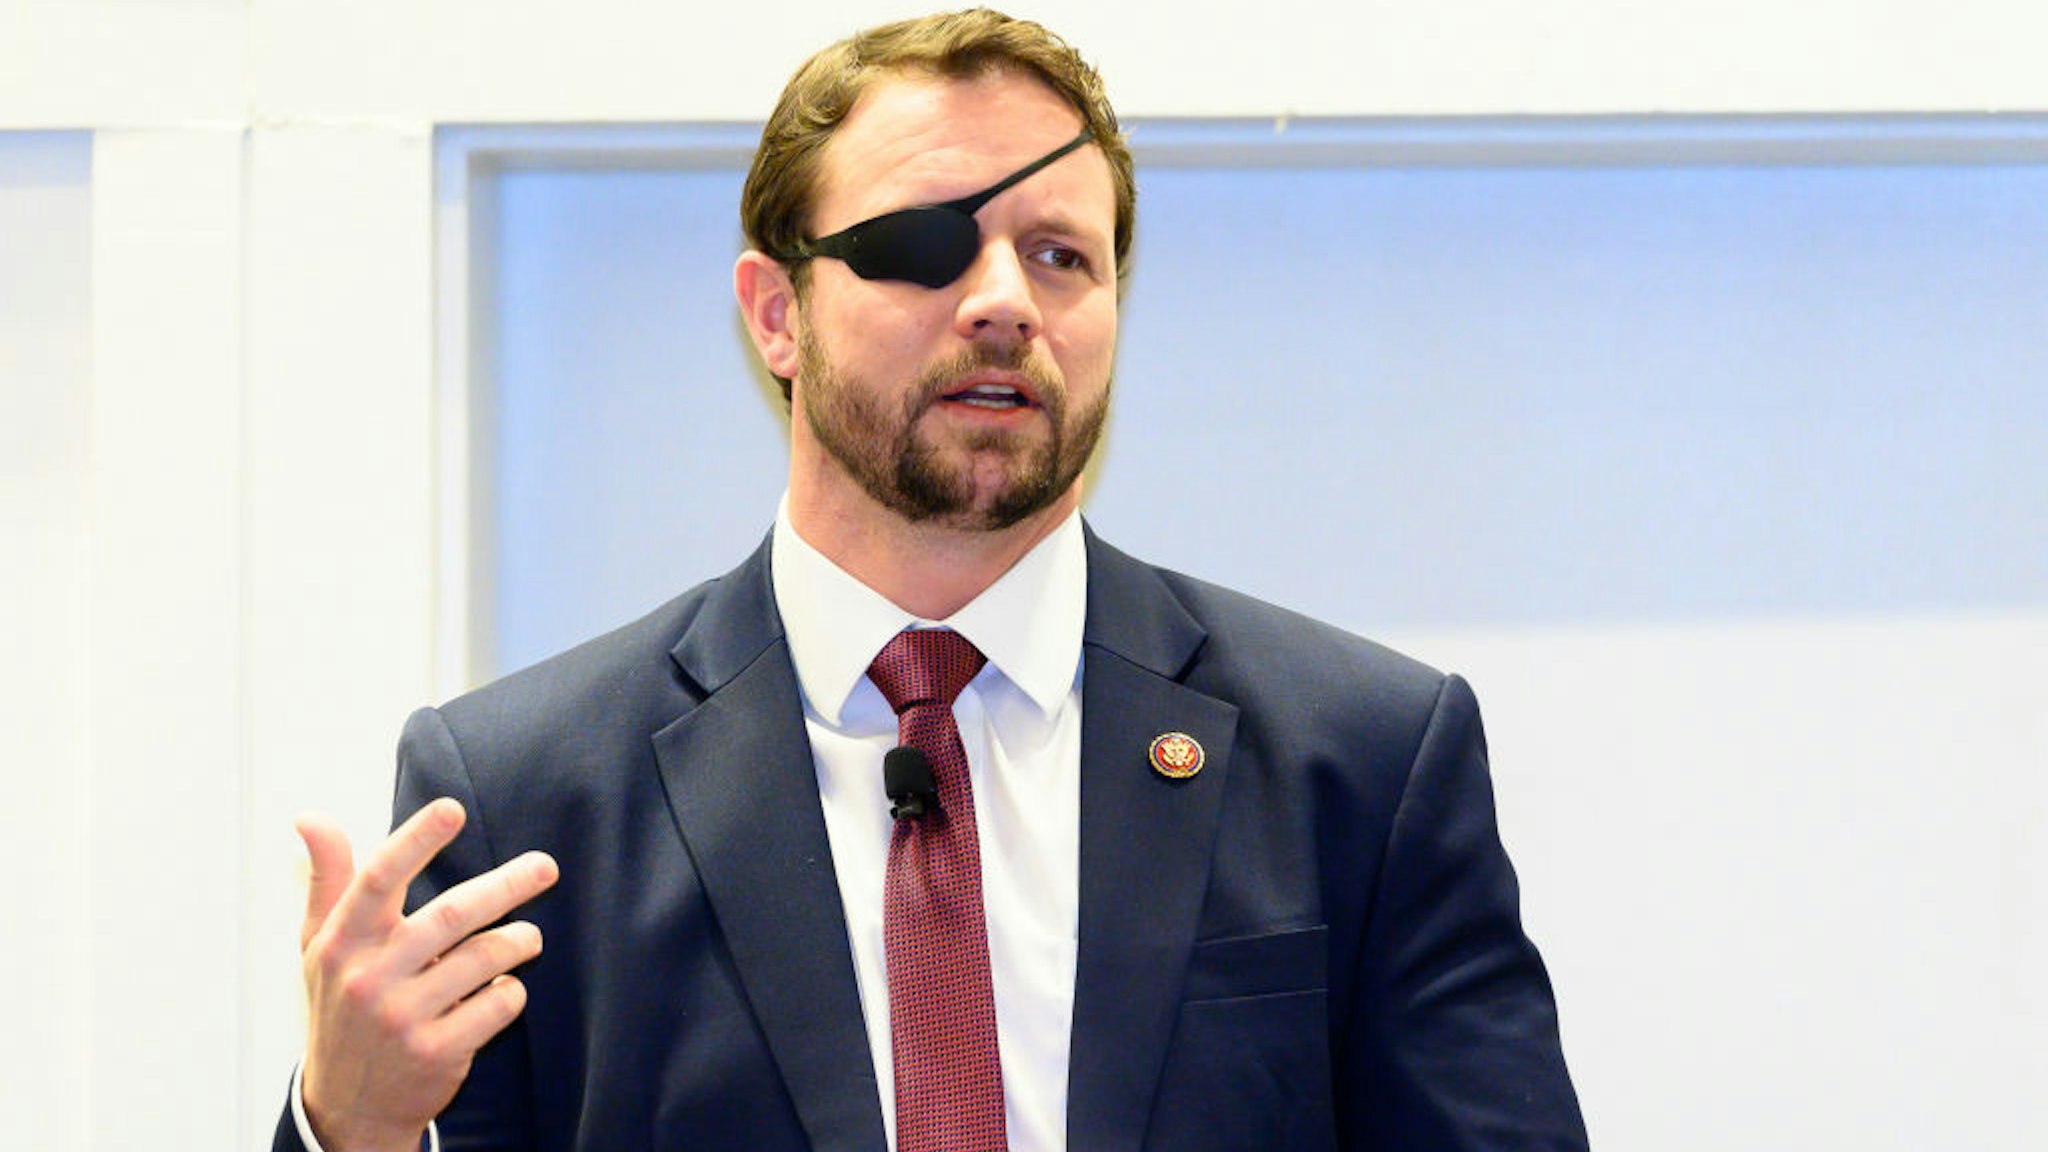 Dan Crenshaw seen speaking at the American Conservative Union's Conservative Political Action Conference